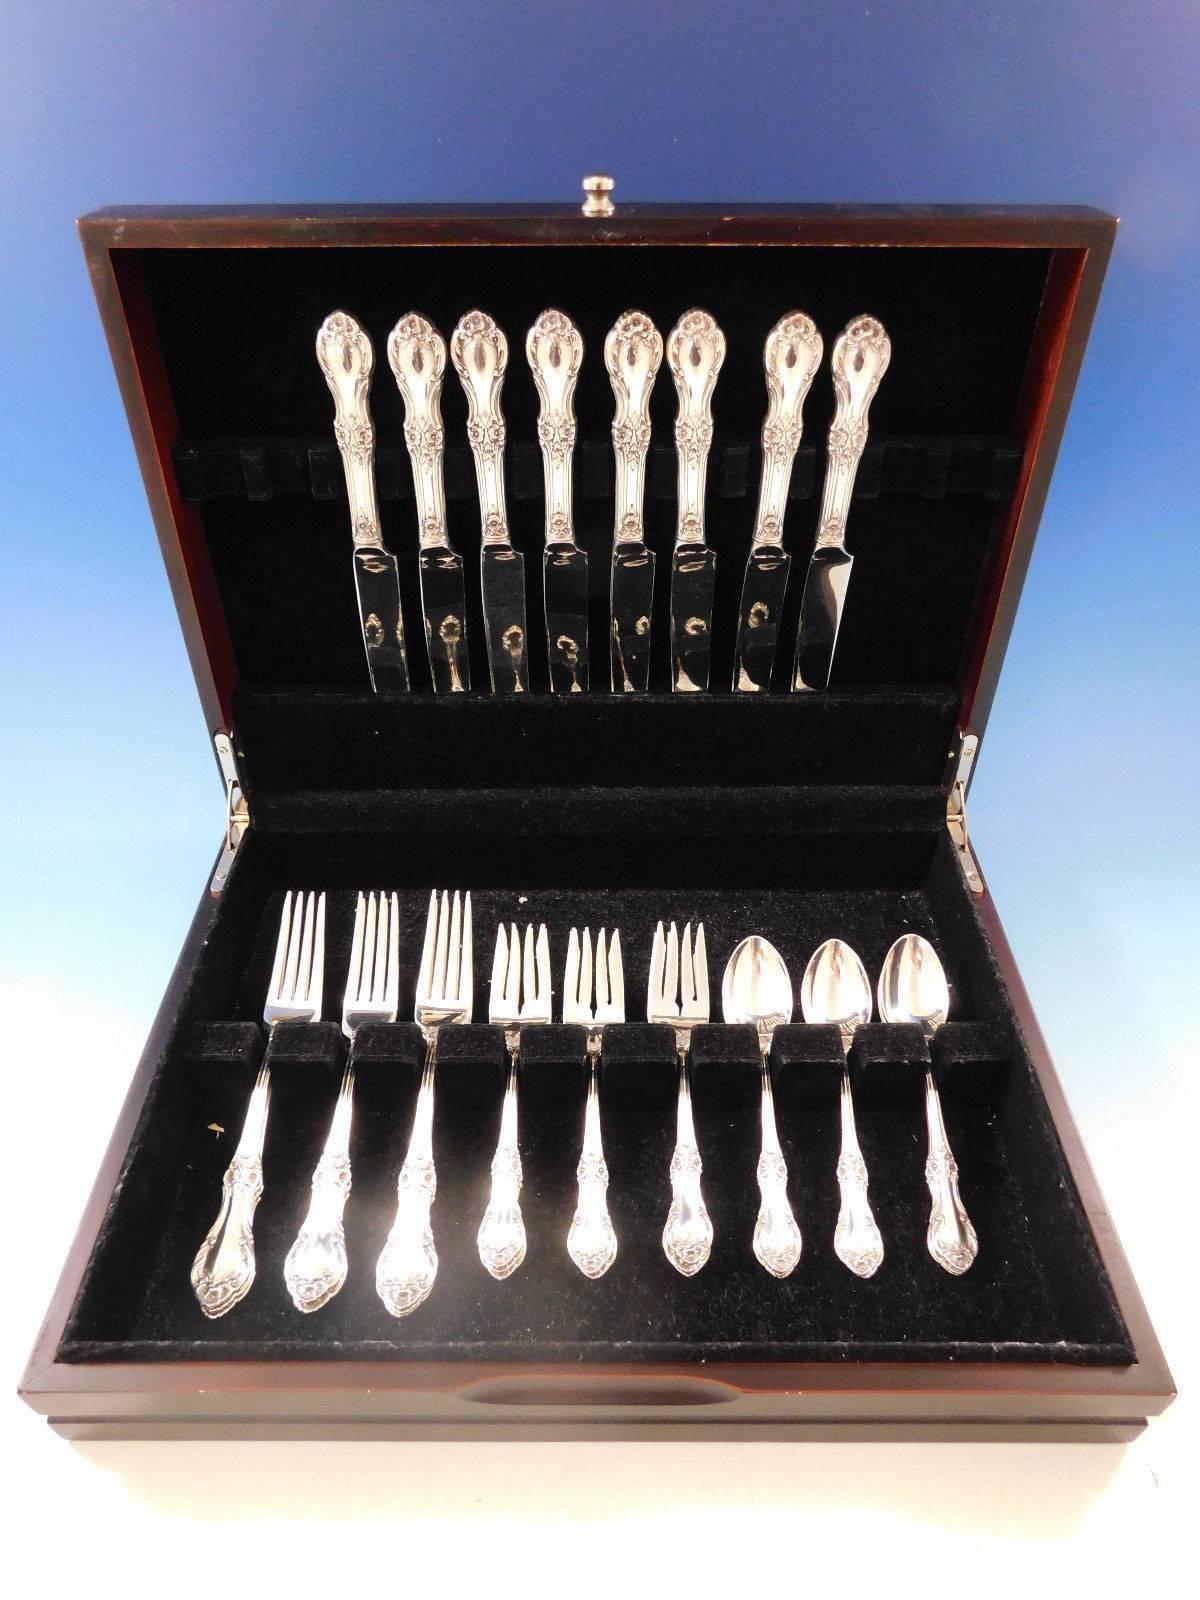 Wild Rose by International sterling silver Flatware set - 32 pieces. This set includes:

Eight knives, 9 1/8